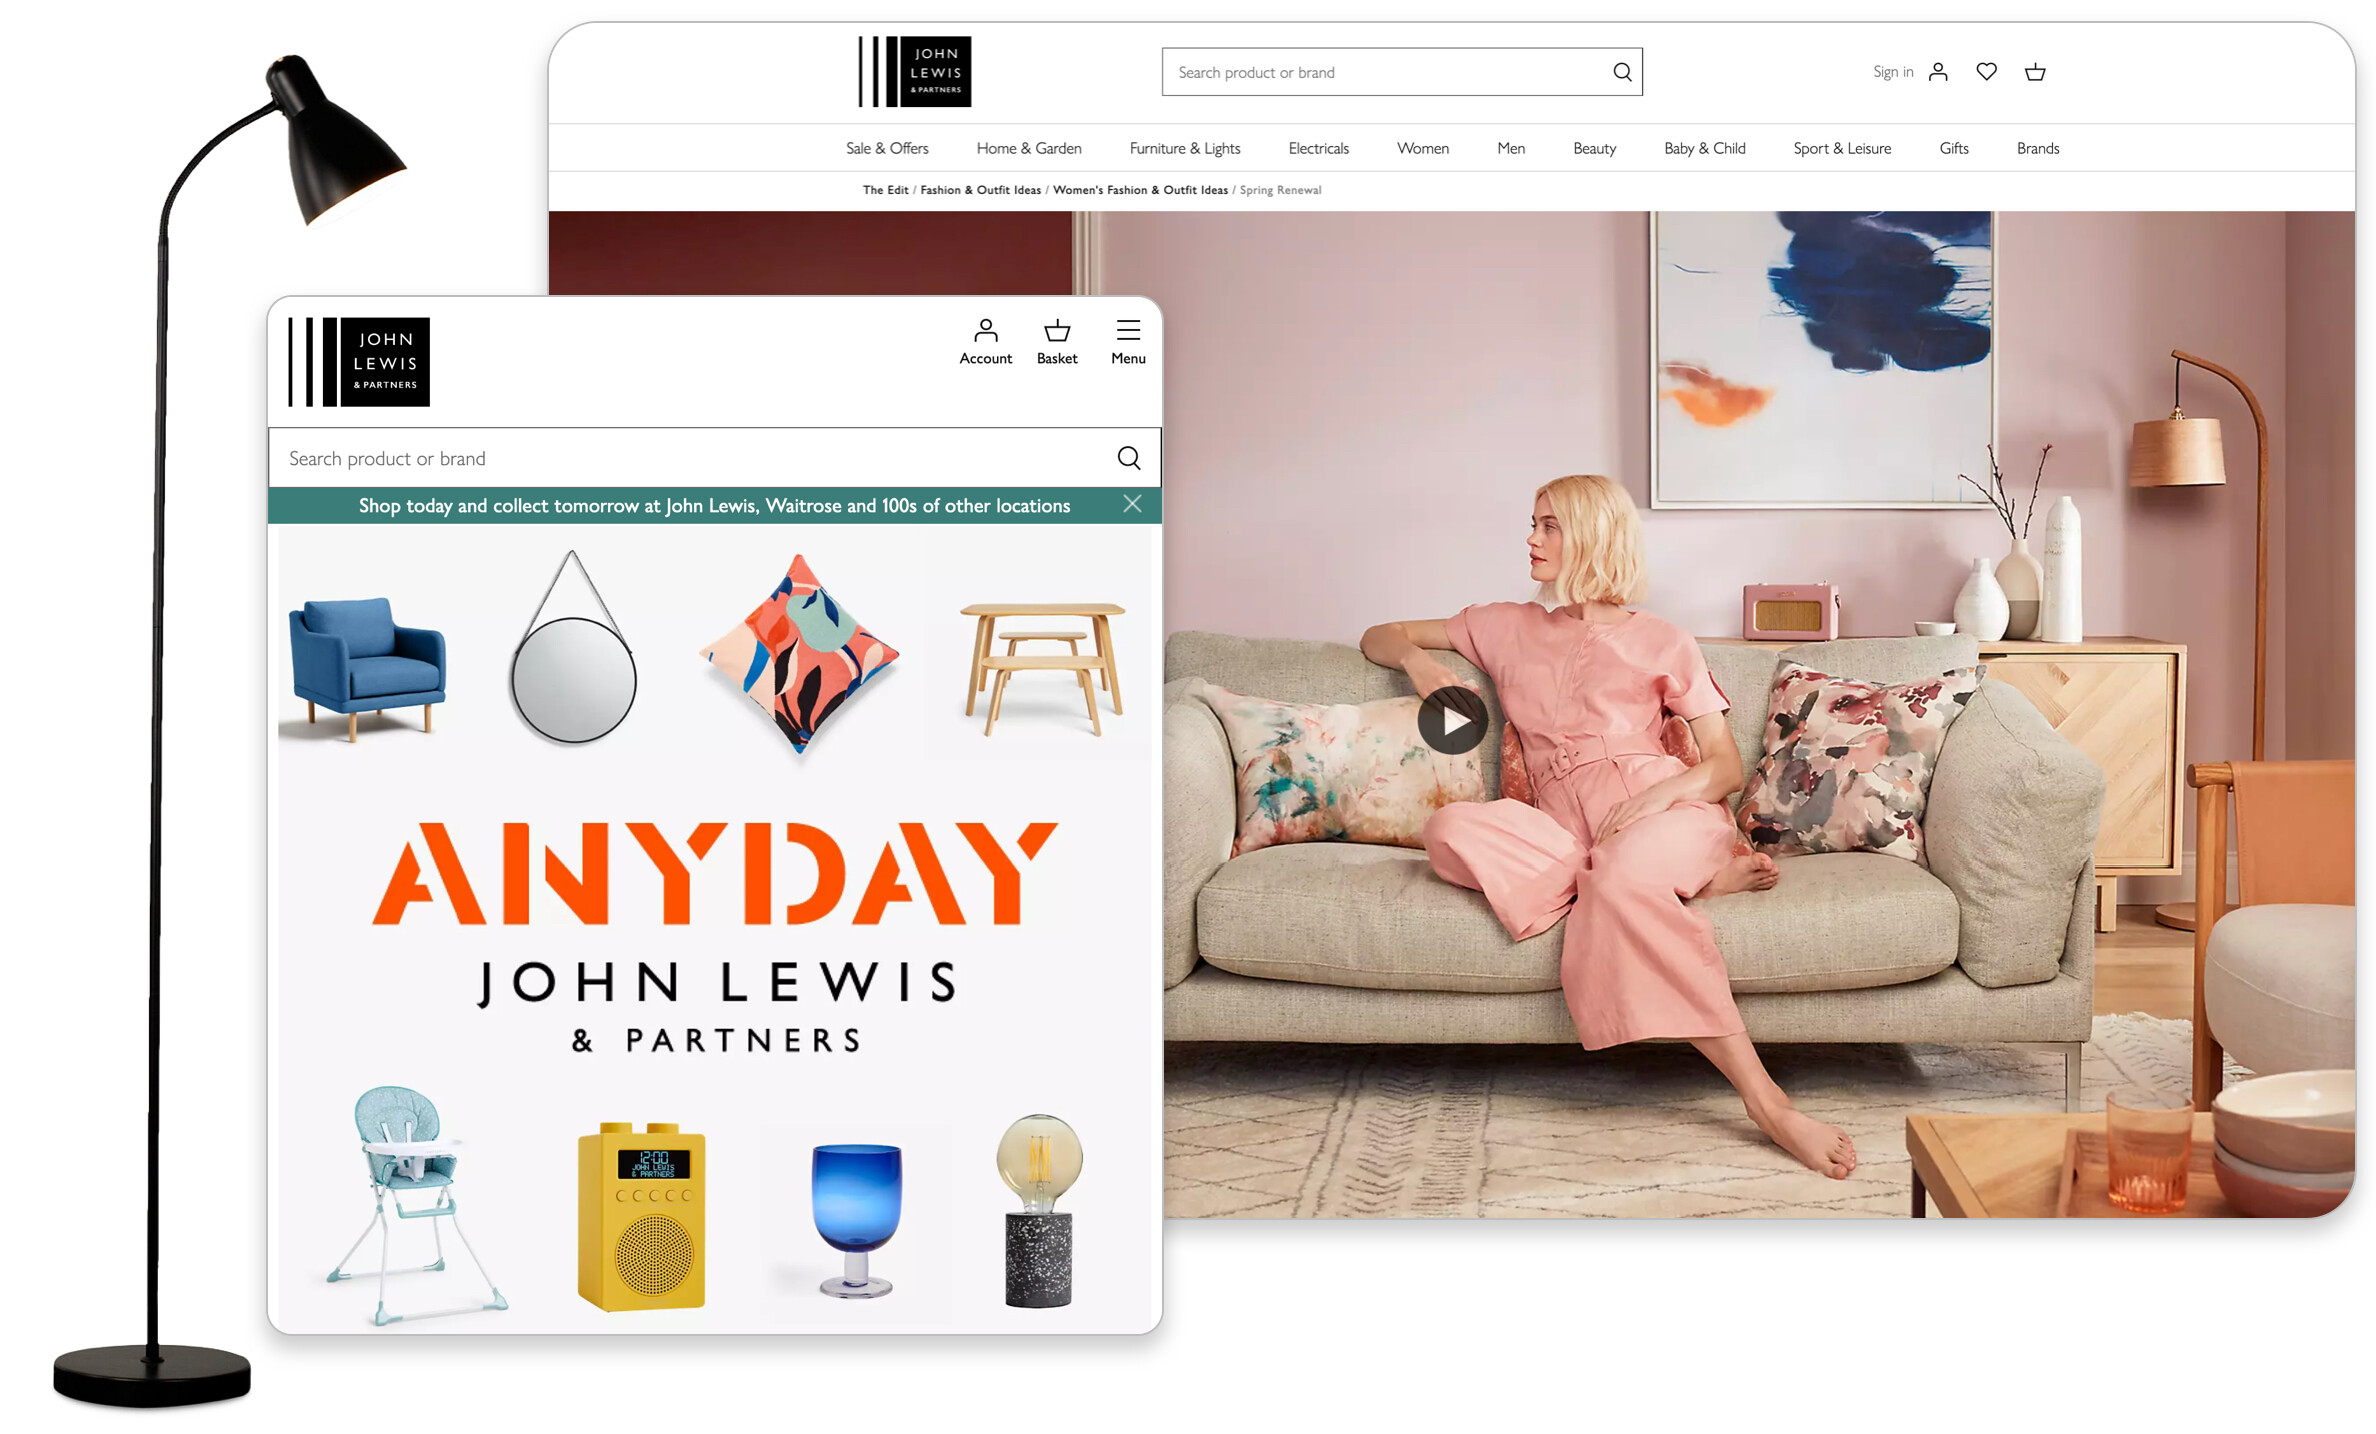 John Lewis & Partners's new digital commerce allows them to customize digital customer experience journeys across every sales channel